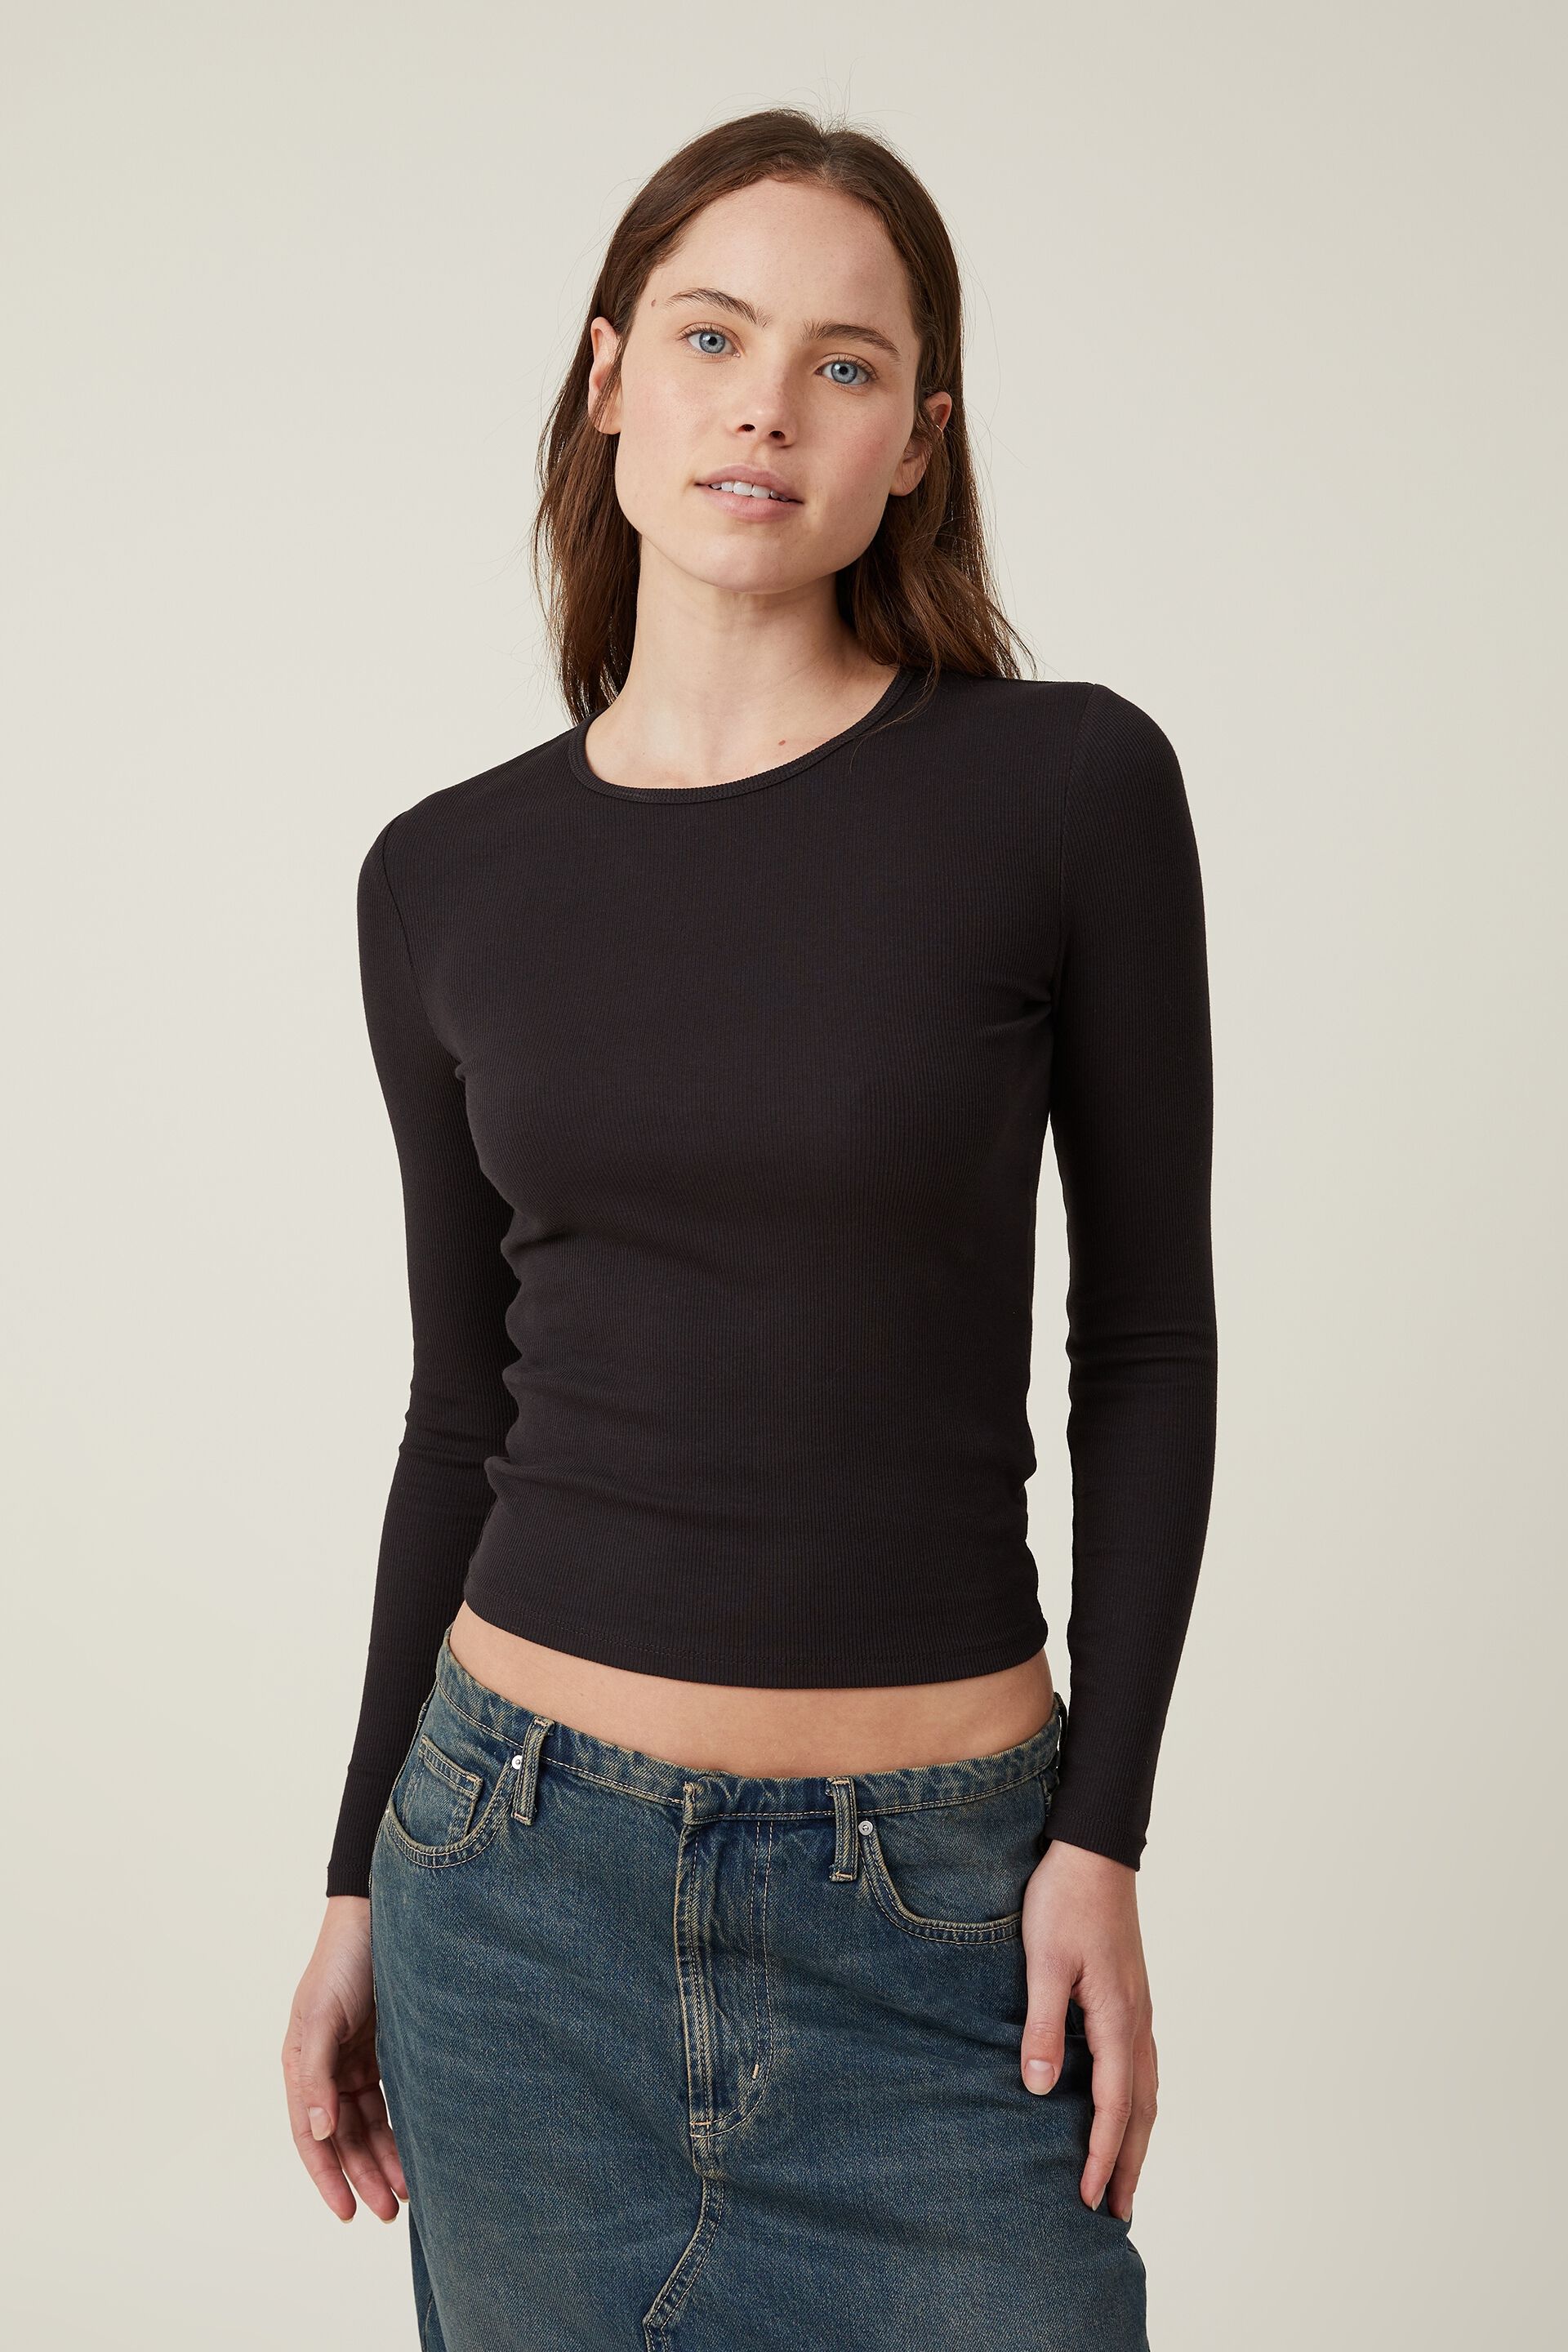 Cotton On Women The One Organic Rib Crew Long Sleeve Top | CoolSprings  Galleria